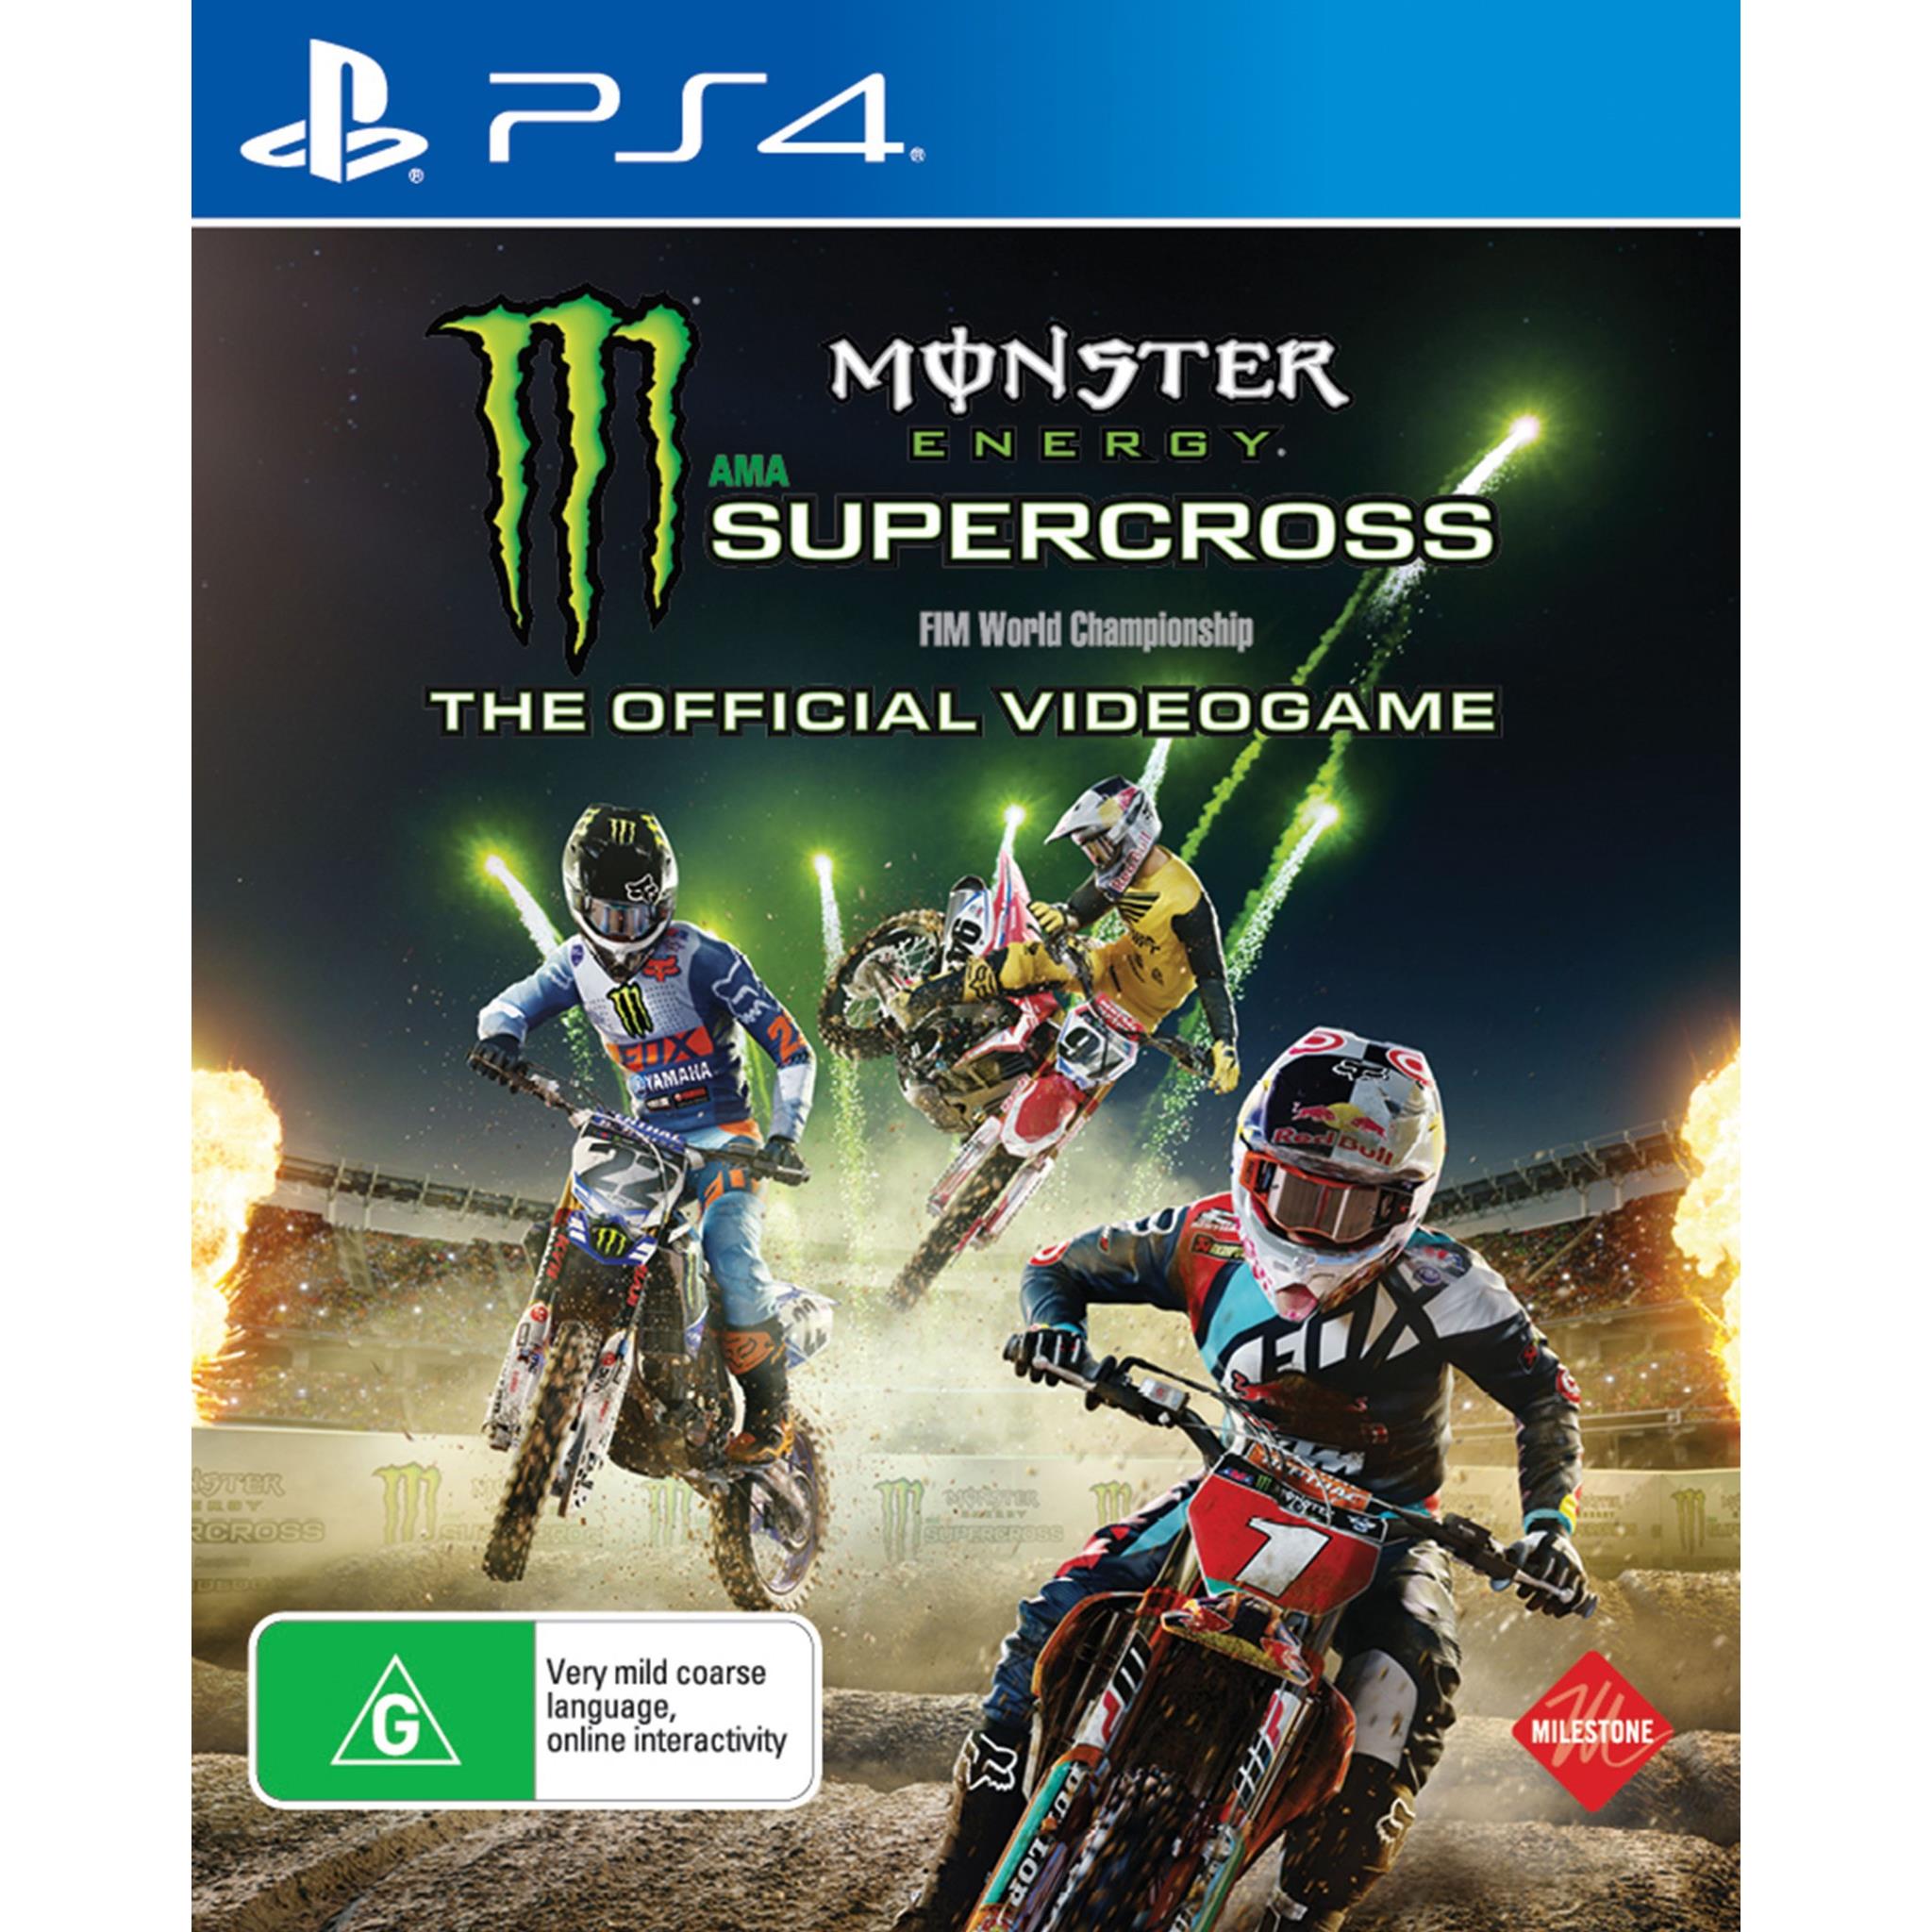 monster energy supercross - the official videogame